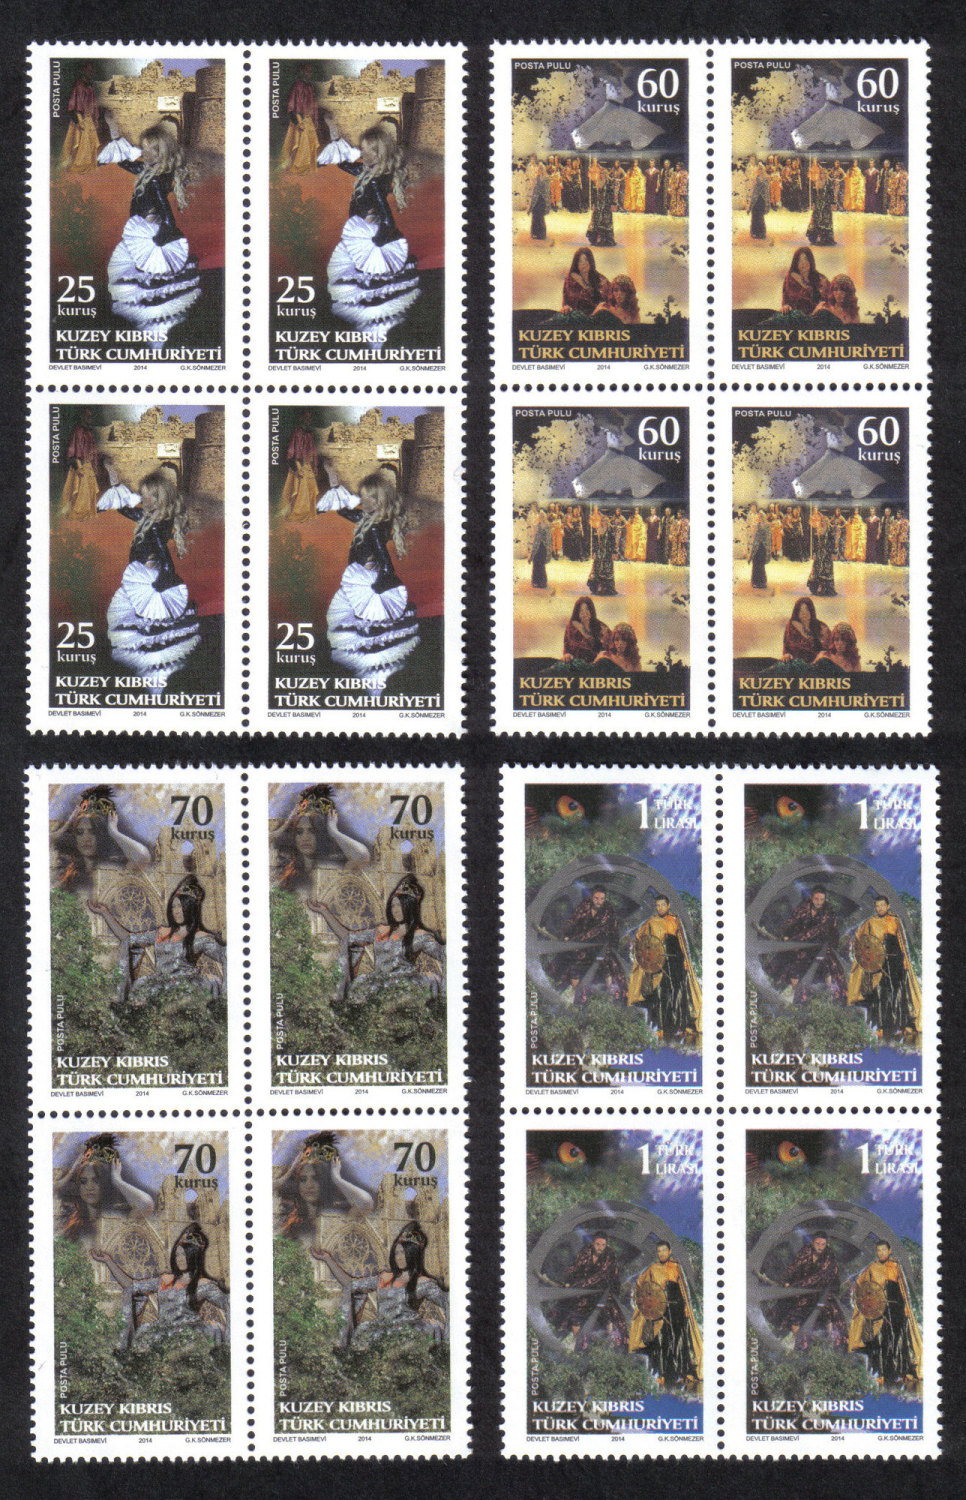 North Cyprus Stamps SG 2014 (d) The only witness was the Cumbez - Block of 